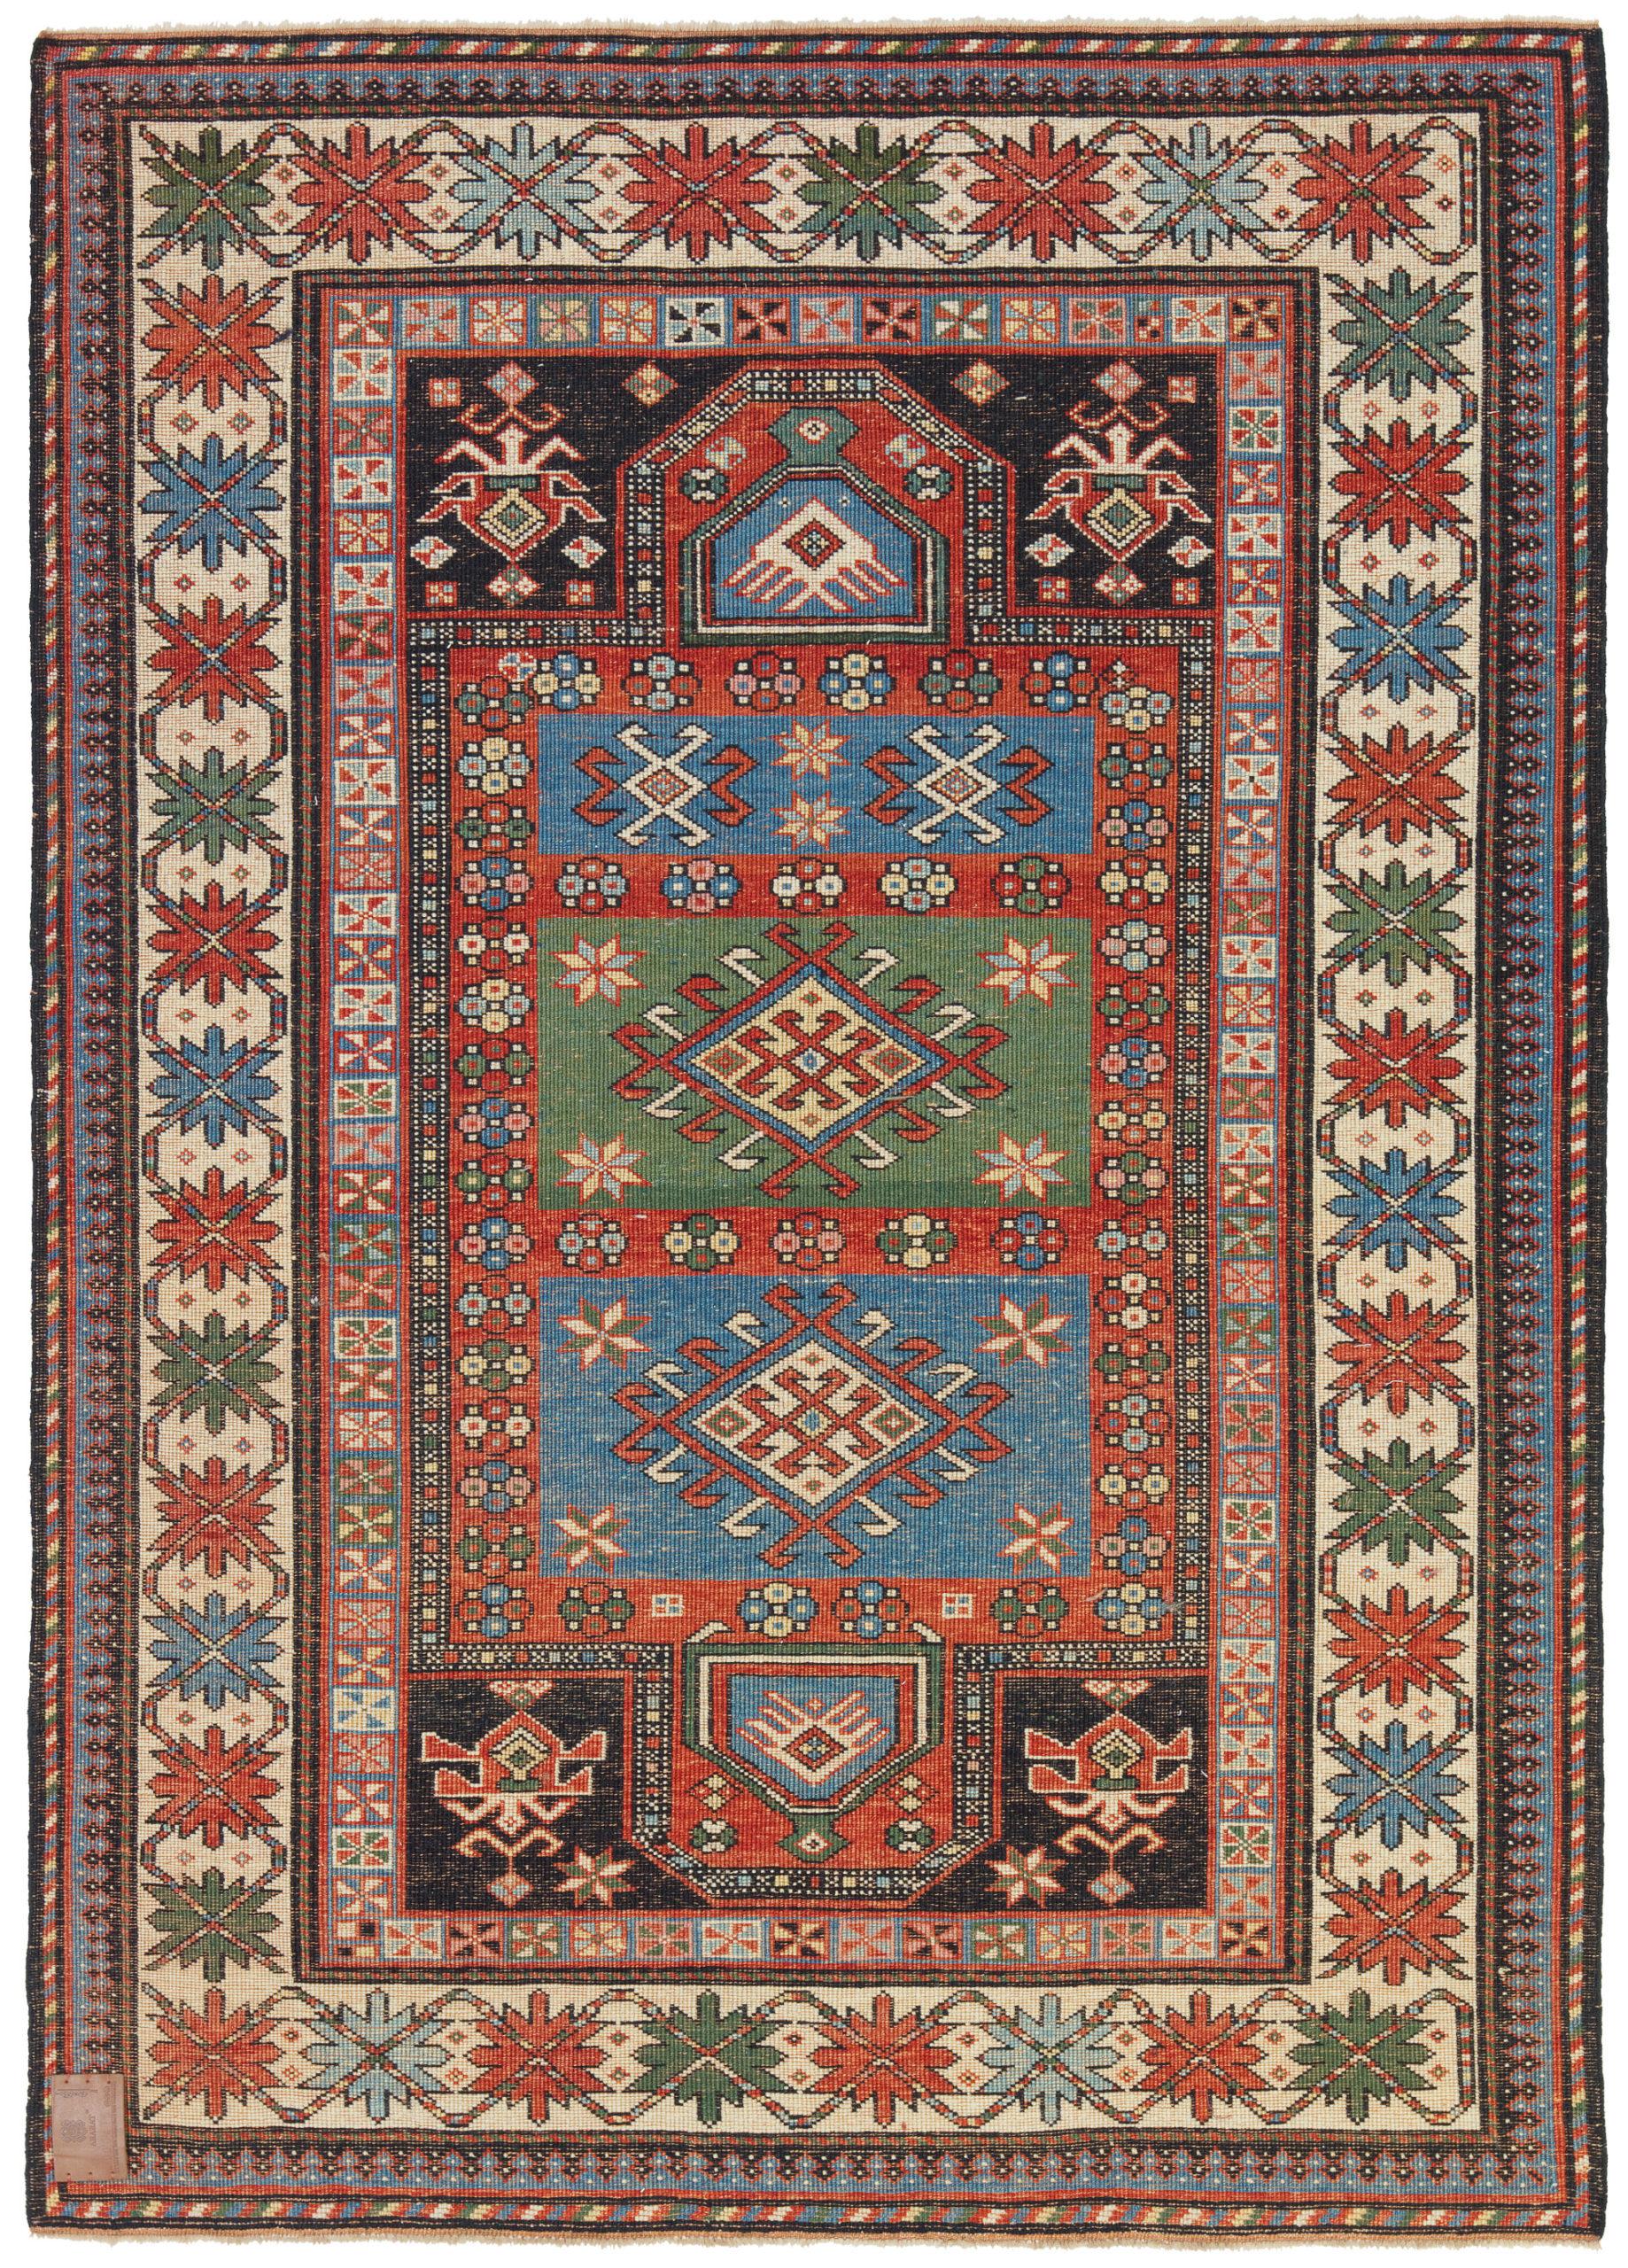 The design source of the rug comes from the book Tapis du Caucase – Rugs of the Caucasus, Ian Bennett & Aziz Bassoul, The Nicholas Sursock Museum, Beirut, Lebanon 2003, nr.46. This is a double migrab prayer rug from the late 19th century, Genje